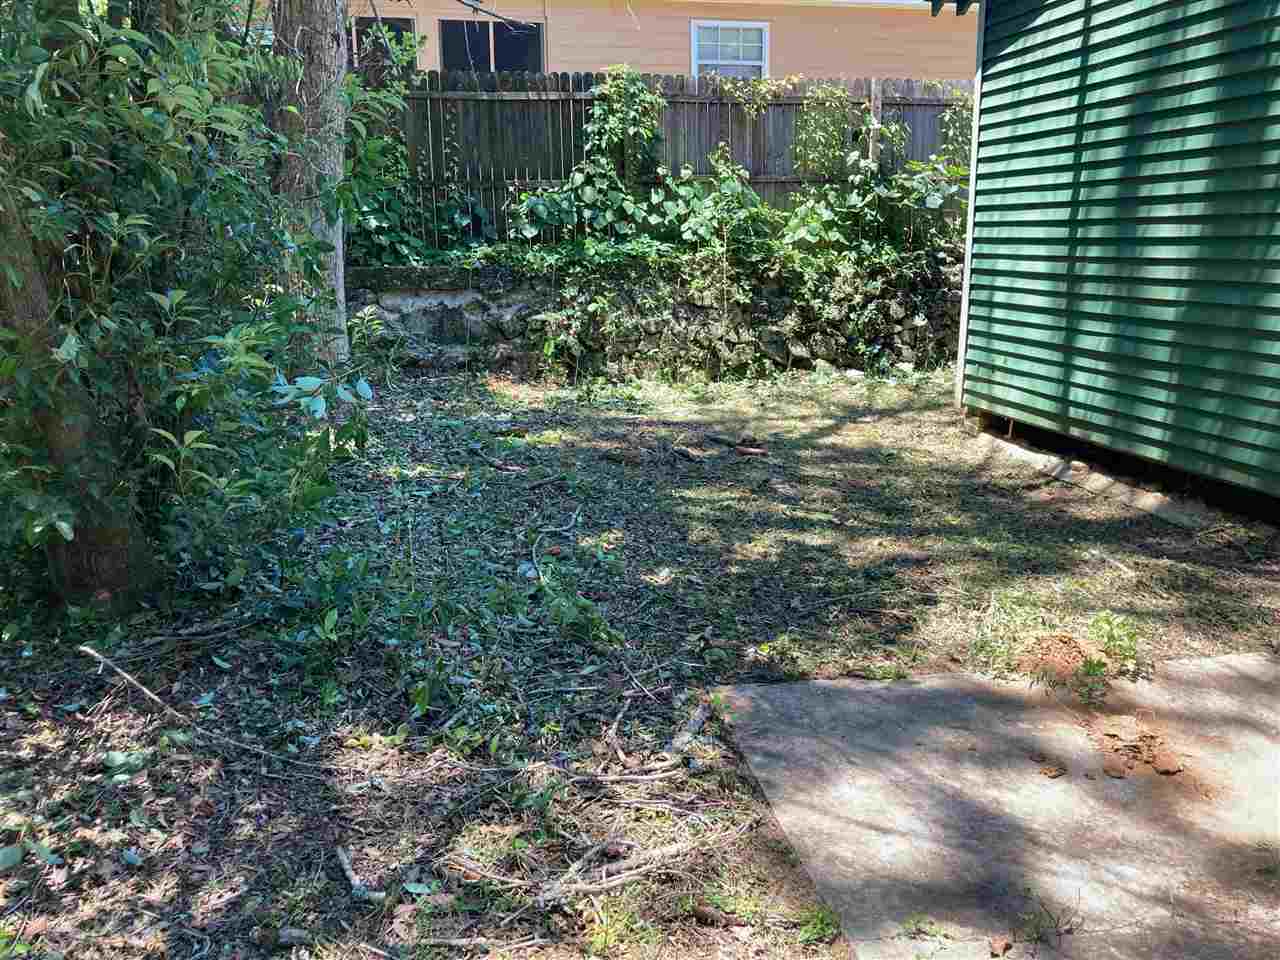 817 Dover Street,TALLAHASSEE,Florida 32304,3 Bedrooms Bedrooms,2 BathroomsBathrooms,Detached single family,817 Dover Street,367623